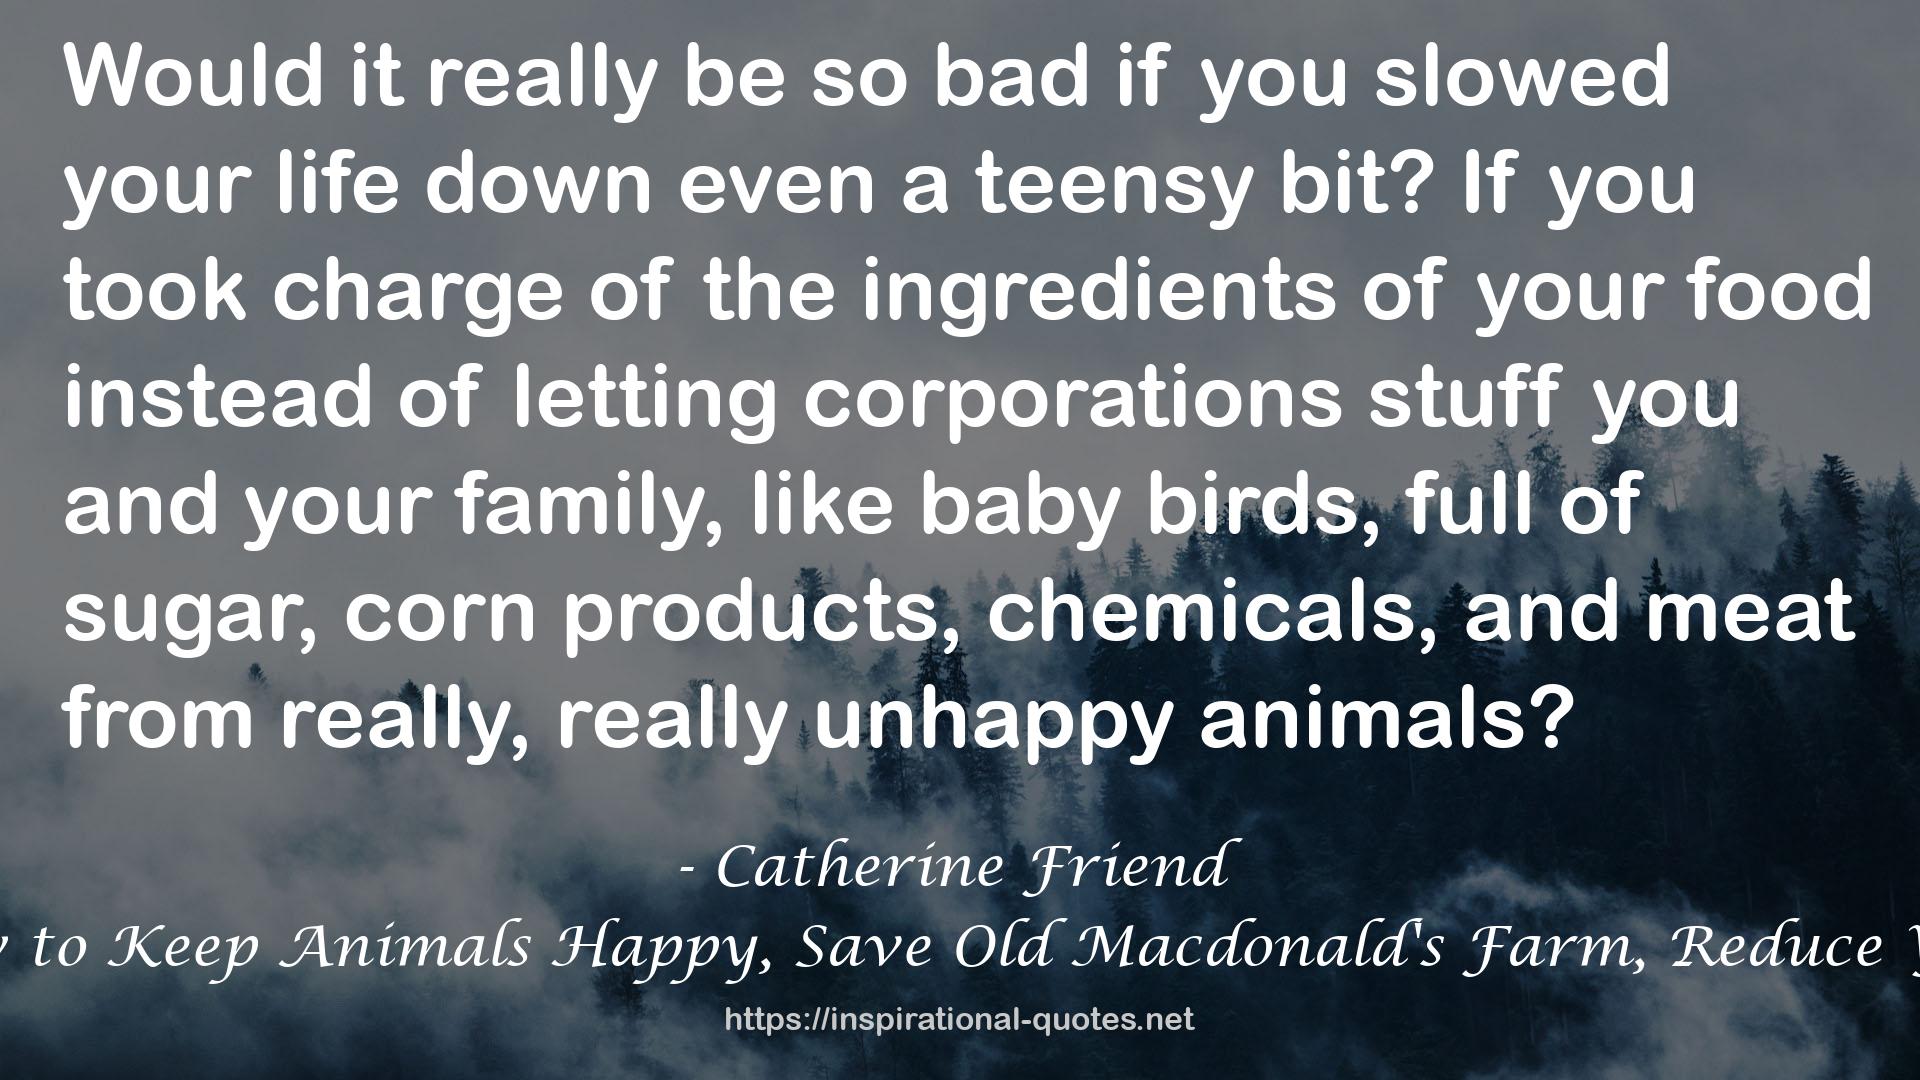 Compassionate Carnivore: Or, How to Keep Animals Happy, Save Old Macdonald's Farm, Reduce Your Hoofprint, and Still Eat Meat QUOTES